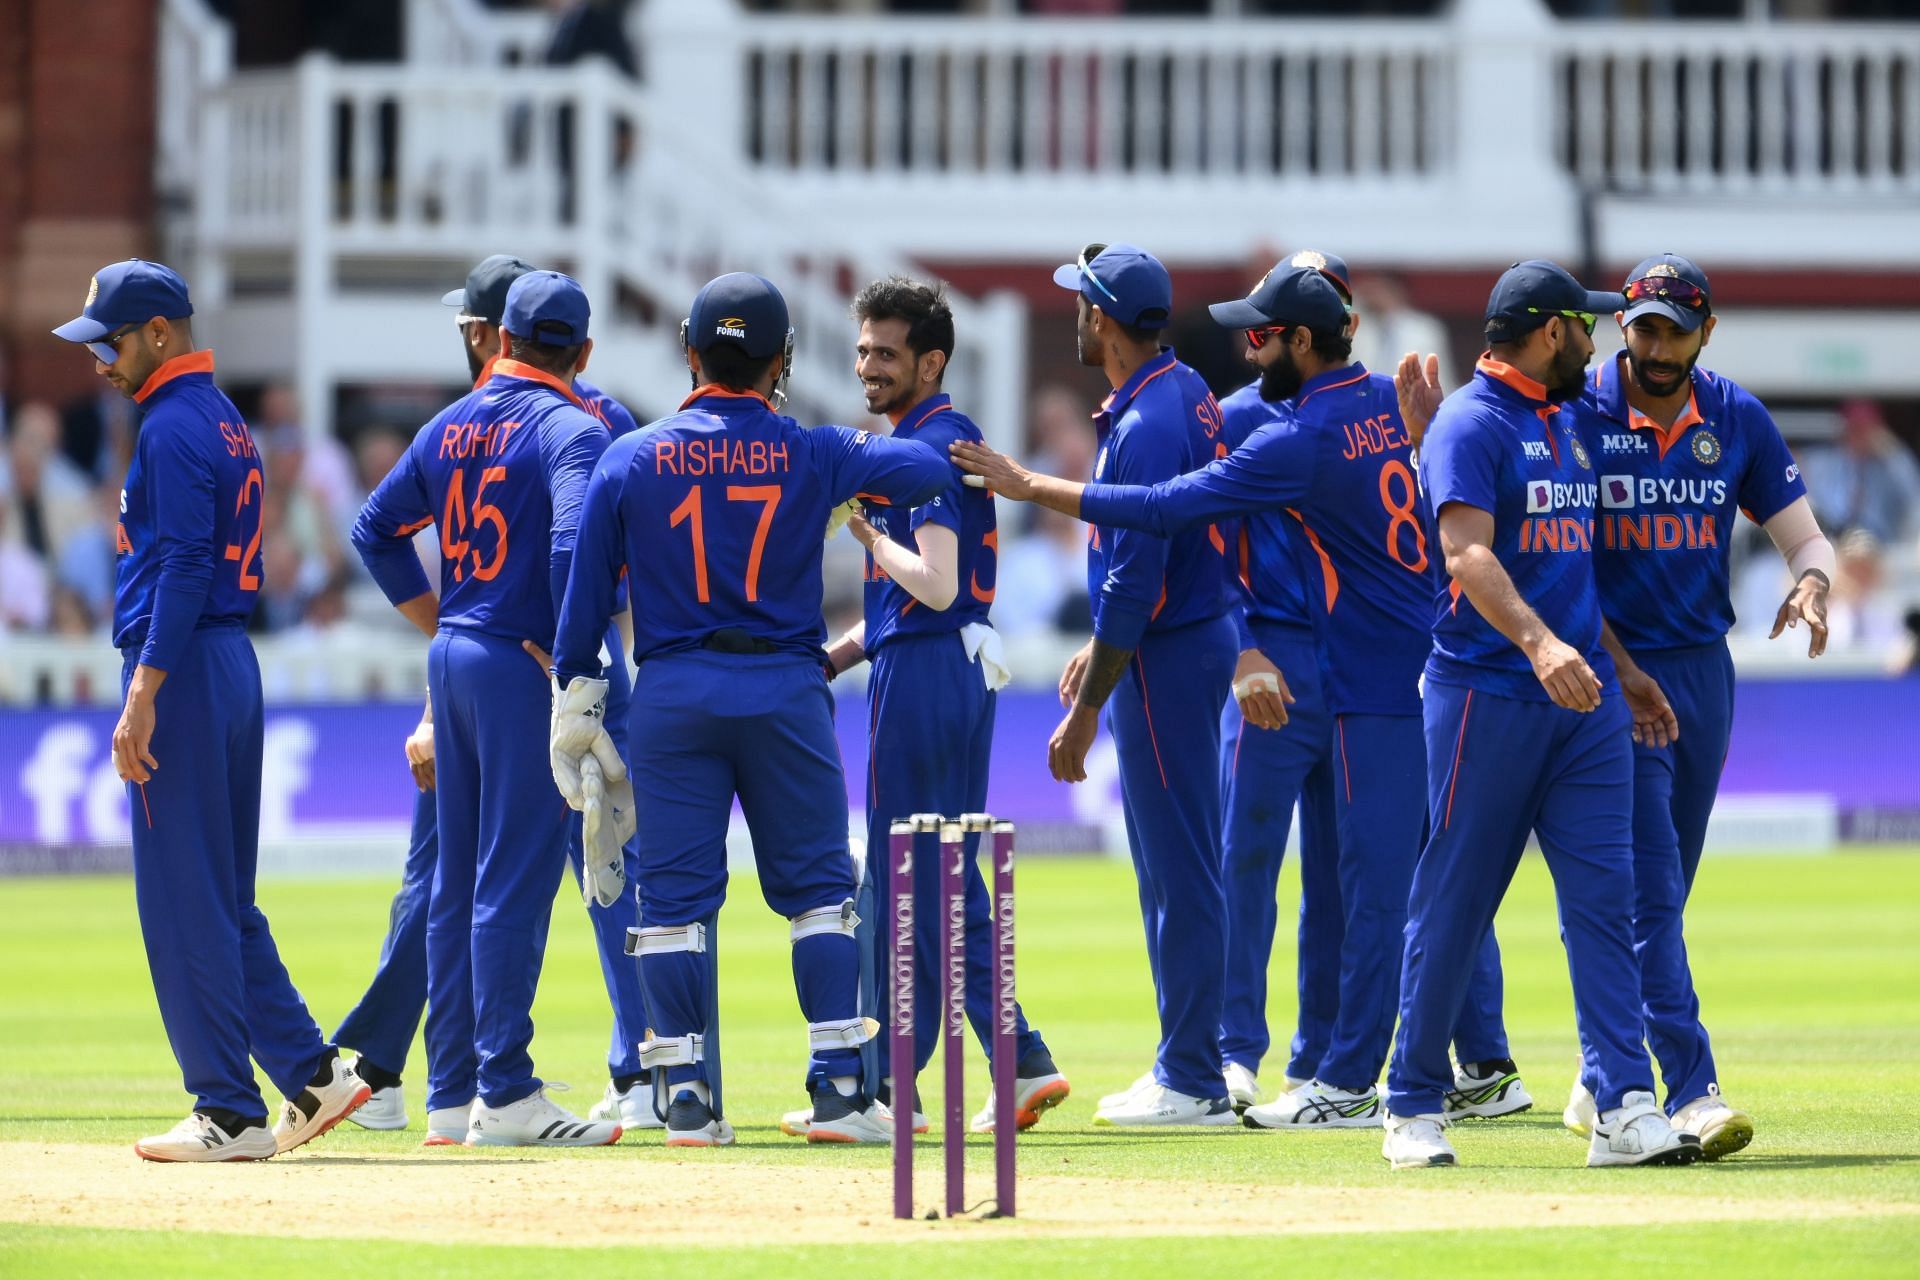 England bounced back in the second ODI against India to level the series 1-1.